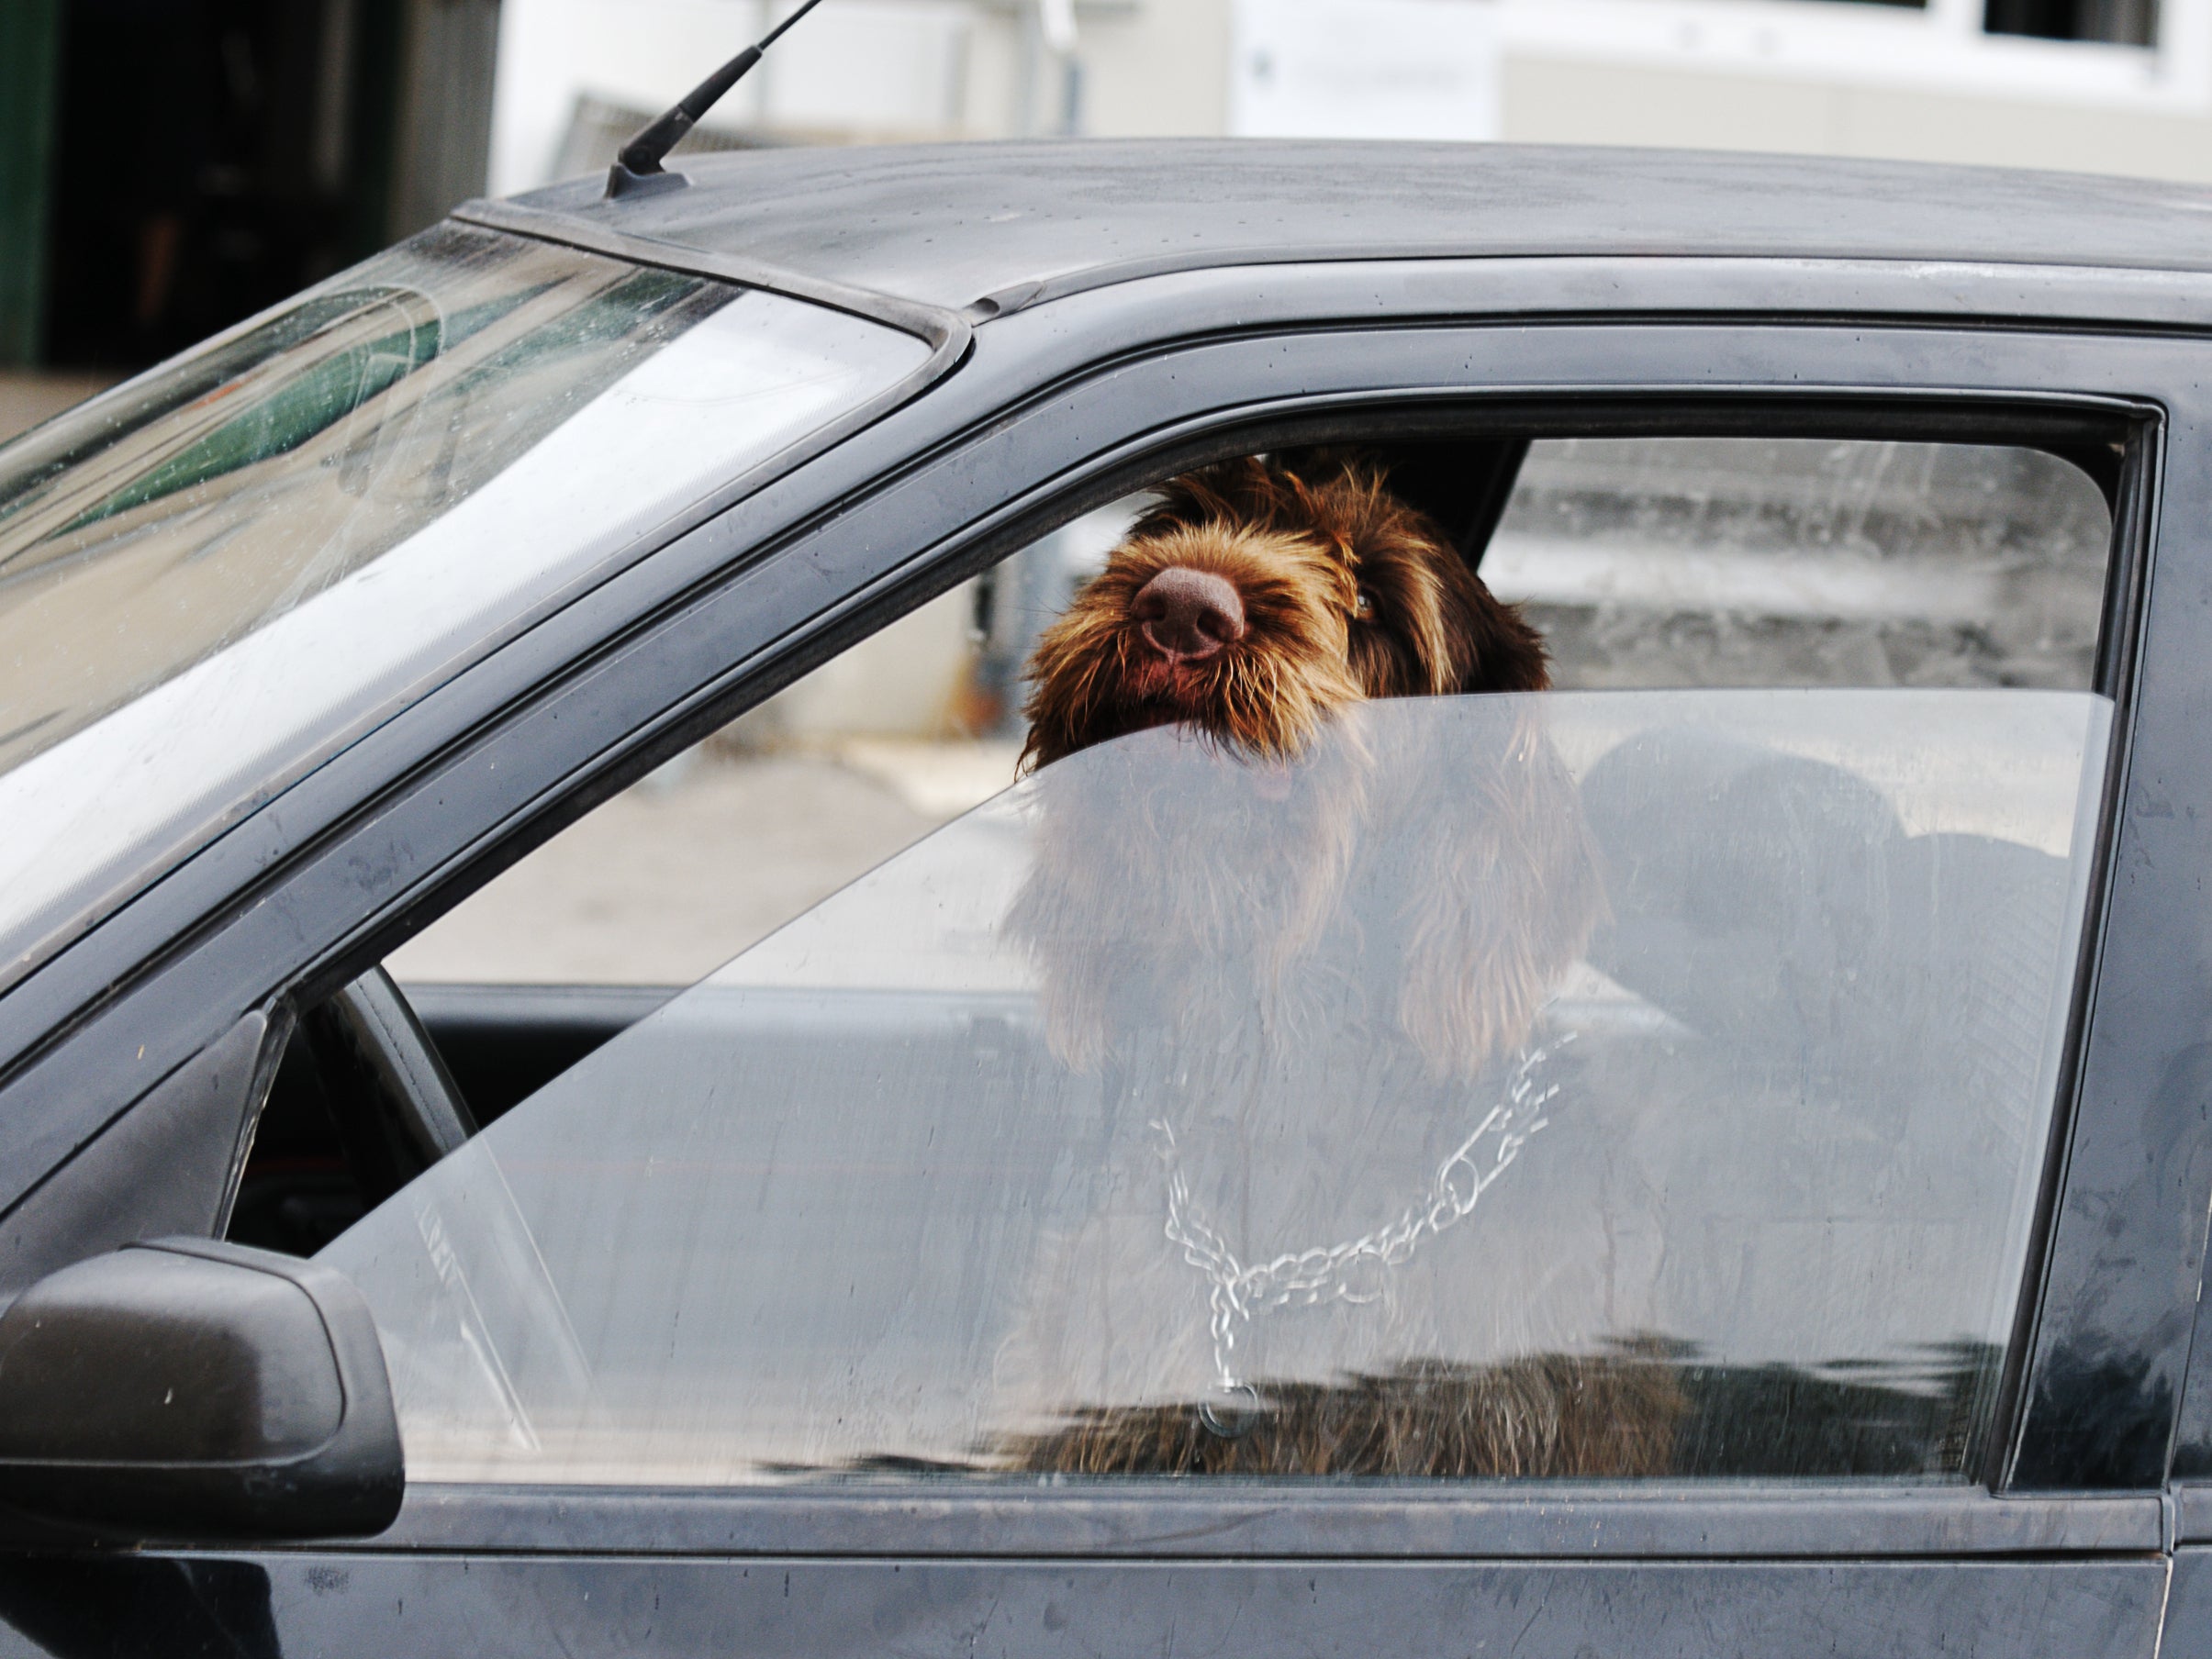 An RSPCA investigator is calling for people who leave dogs in hot cars to face fines